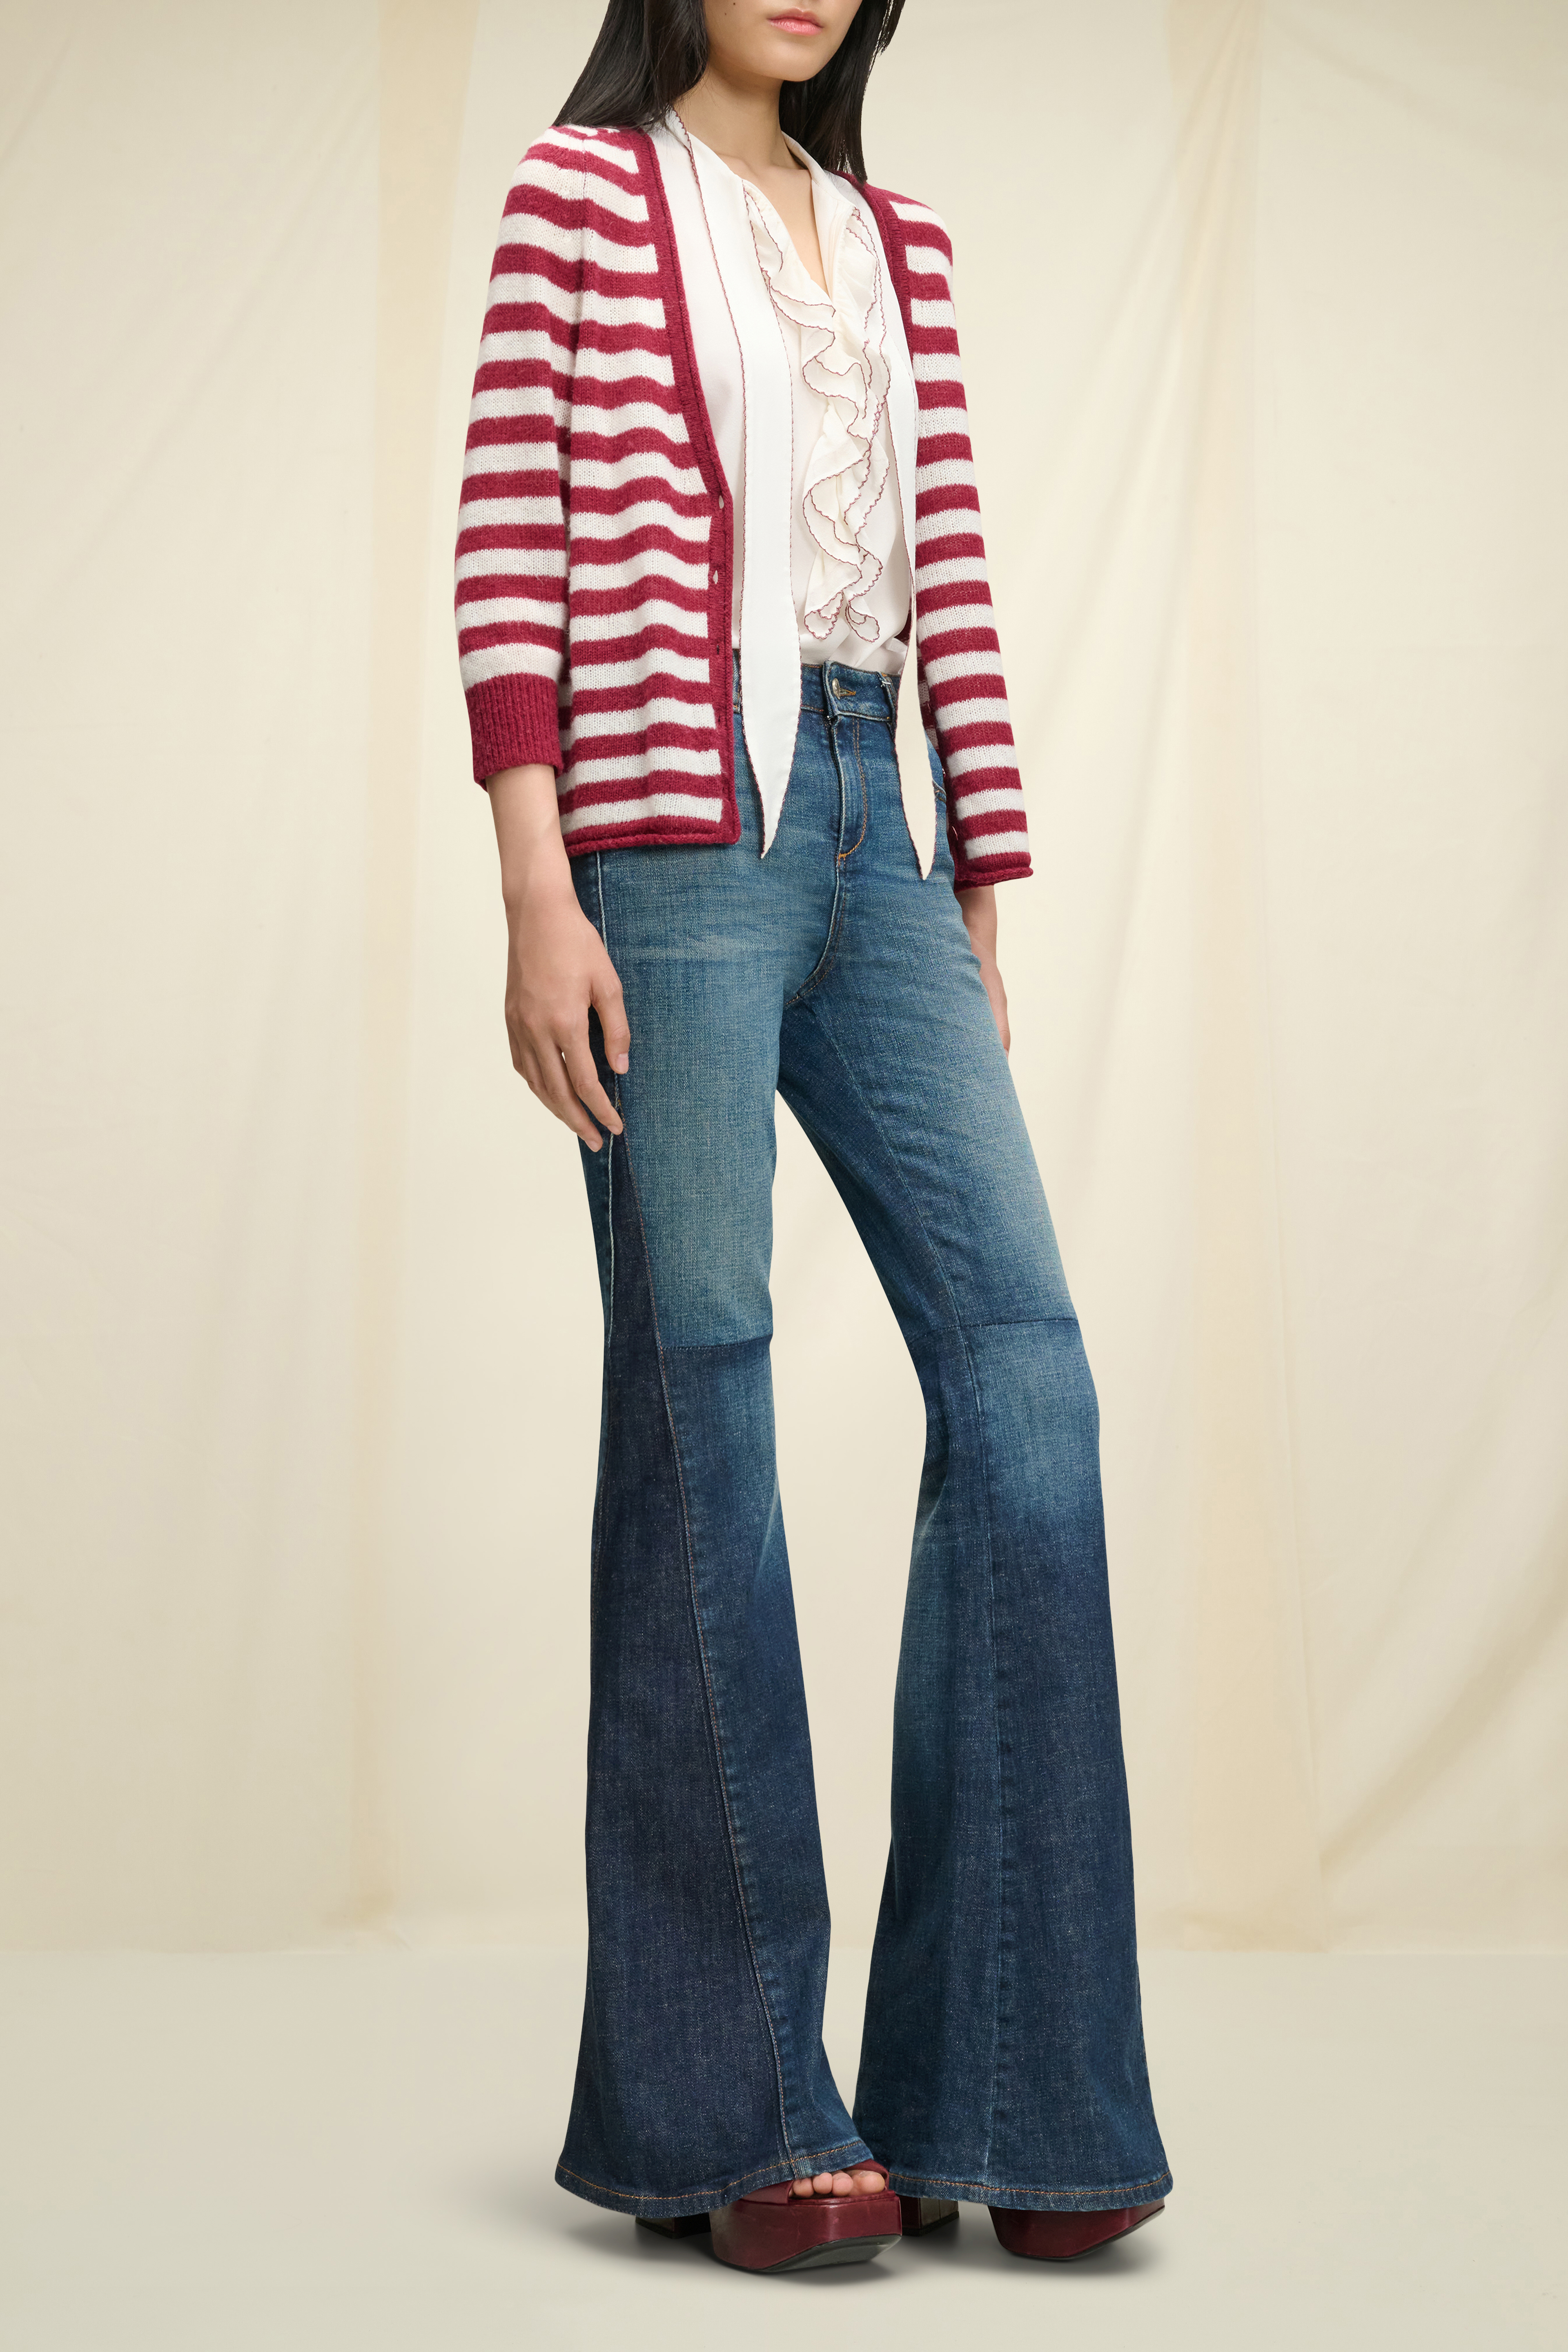 Dorothee Schumacher Striped cardigan with a